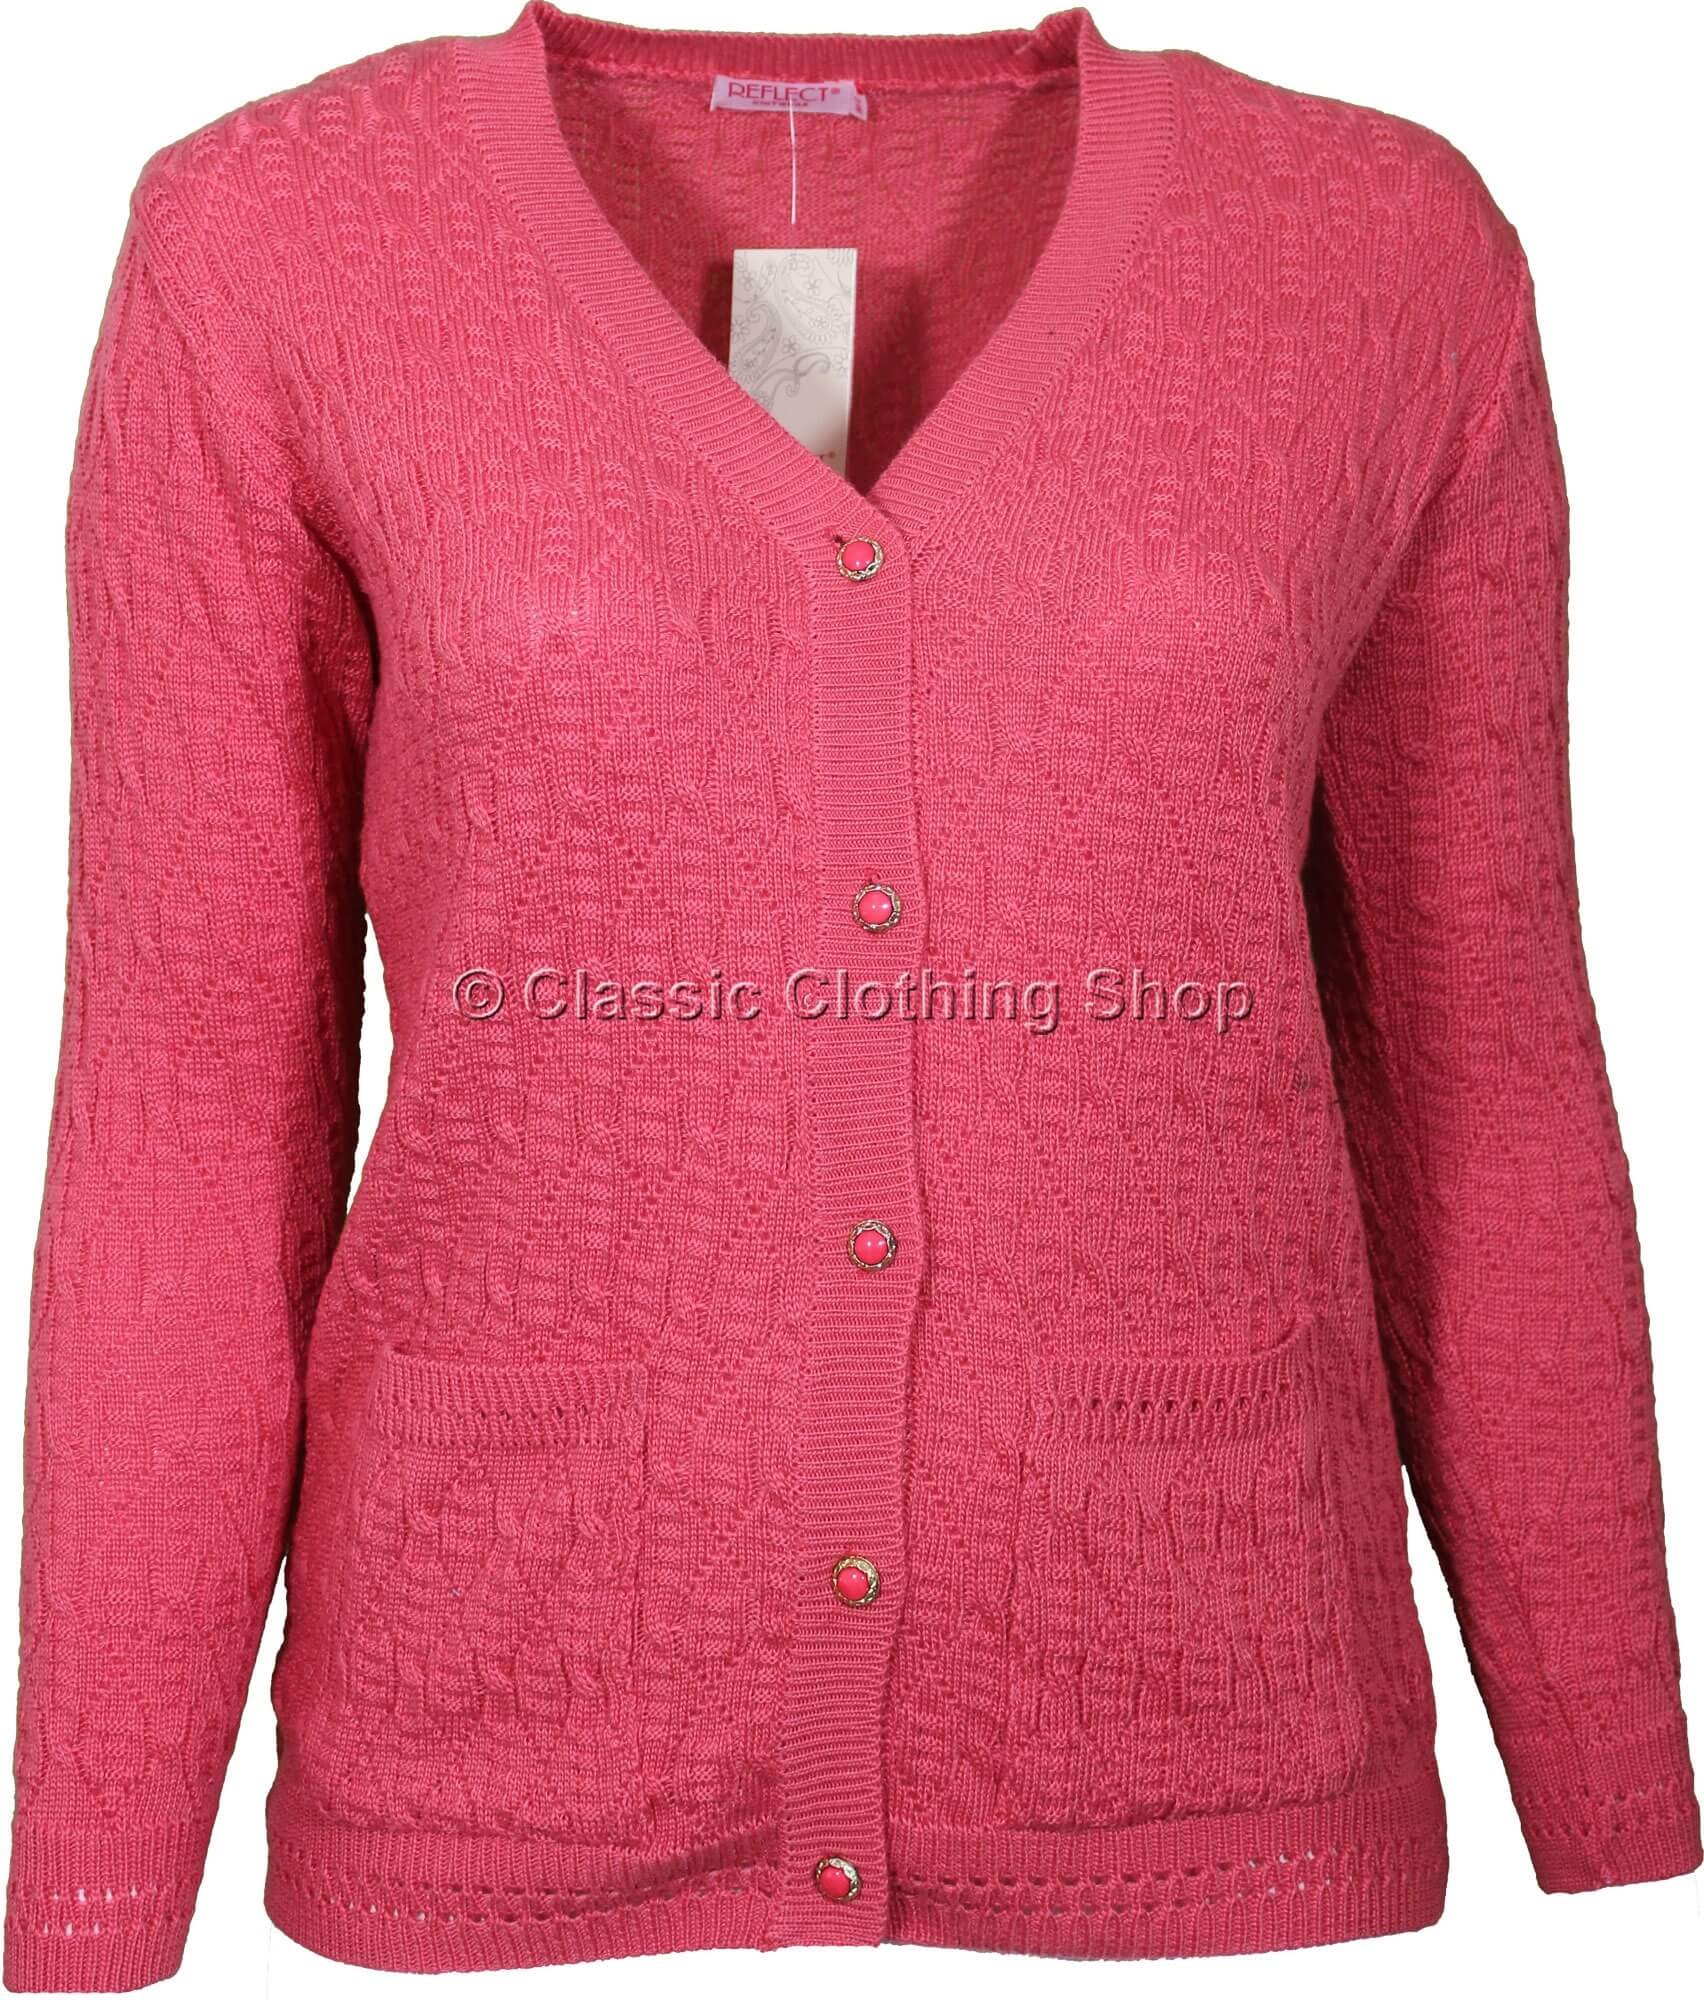 Coral V-Neck Cable Cardigan